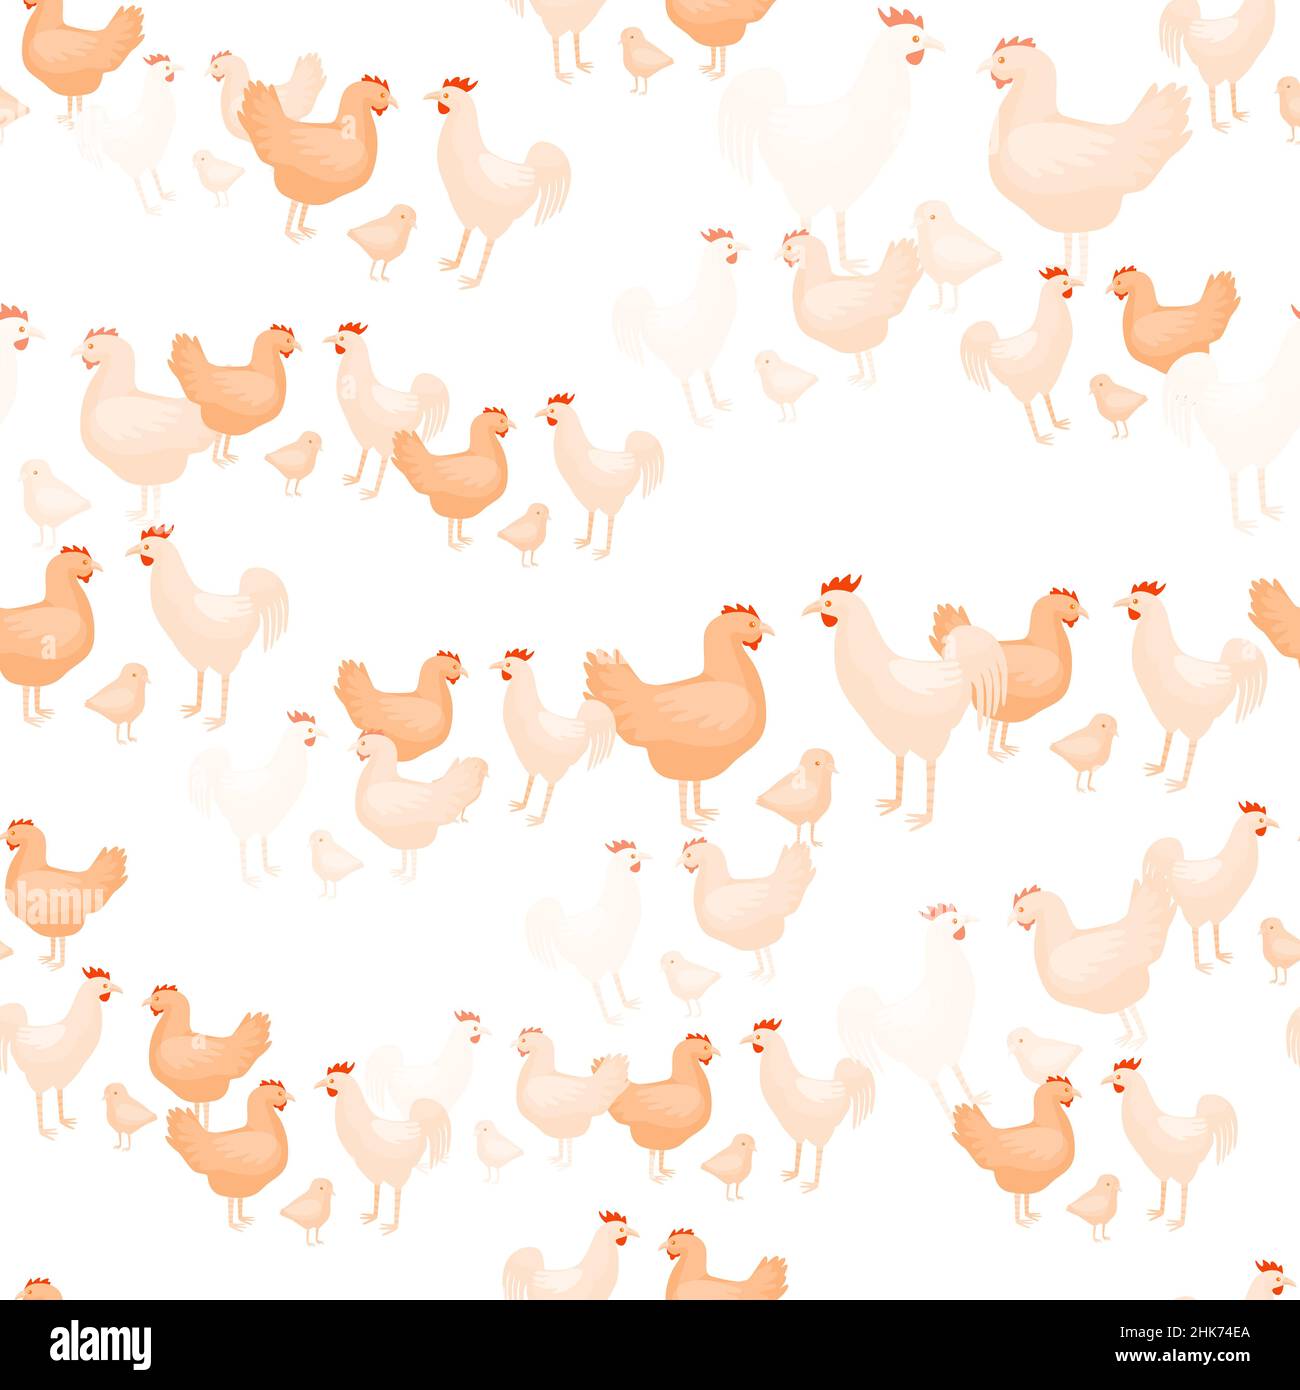 Seamless pattern of chicken family. Domestic animals on colorful background. Vector illustration for textile prints, fabric, banners, backdrops and wa Stock Vector